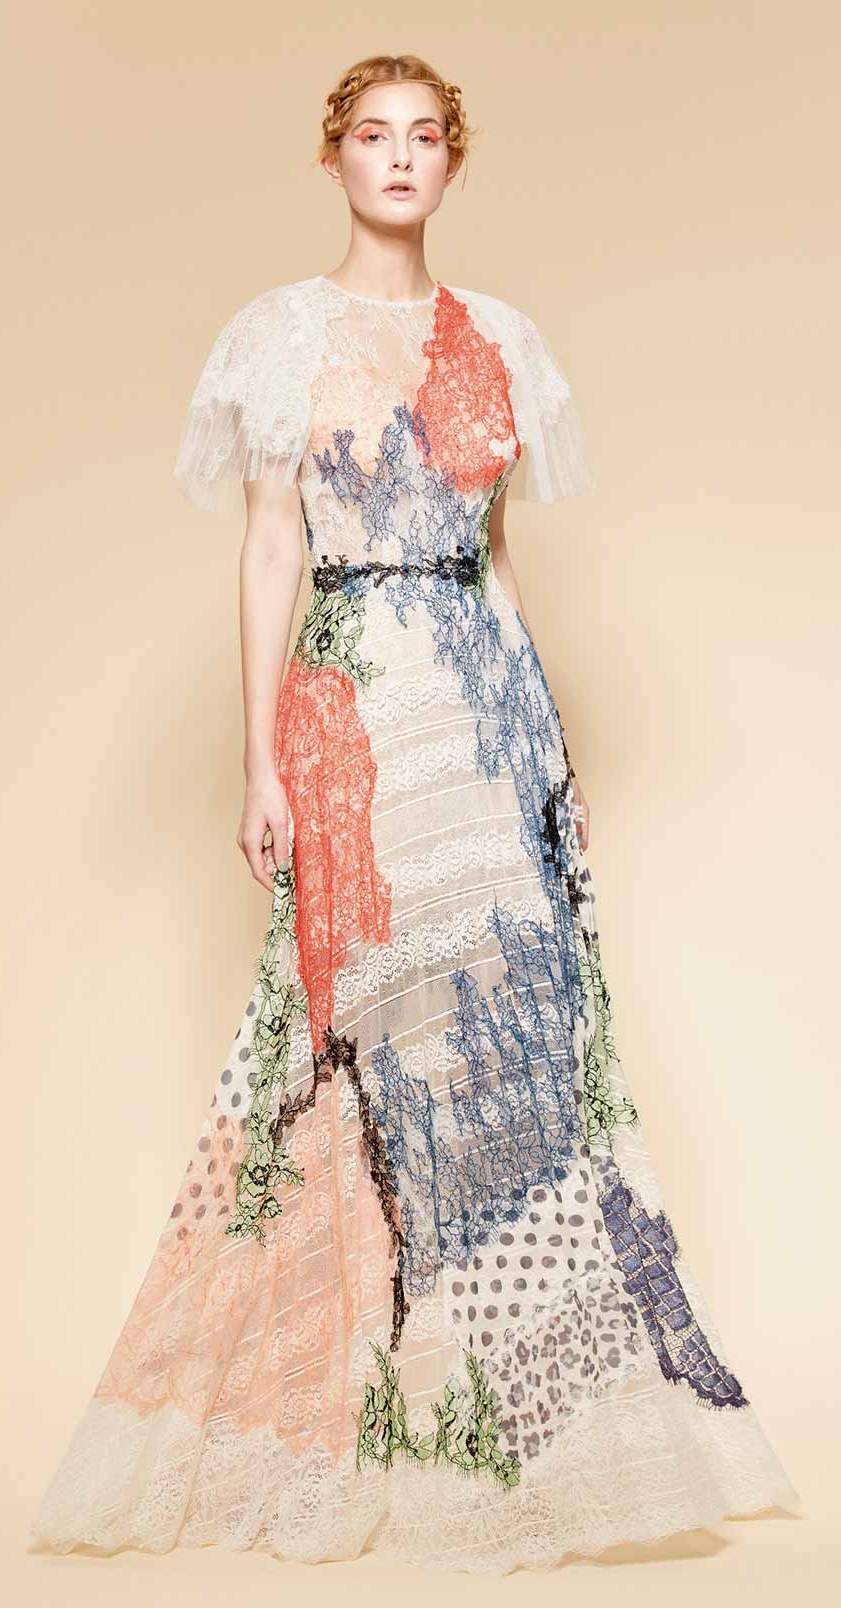 Elegant and delicate colorful gown made of different types of French lace chantilly creating a beautiful patchwork